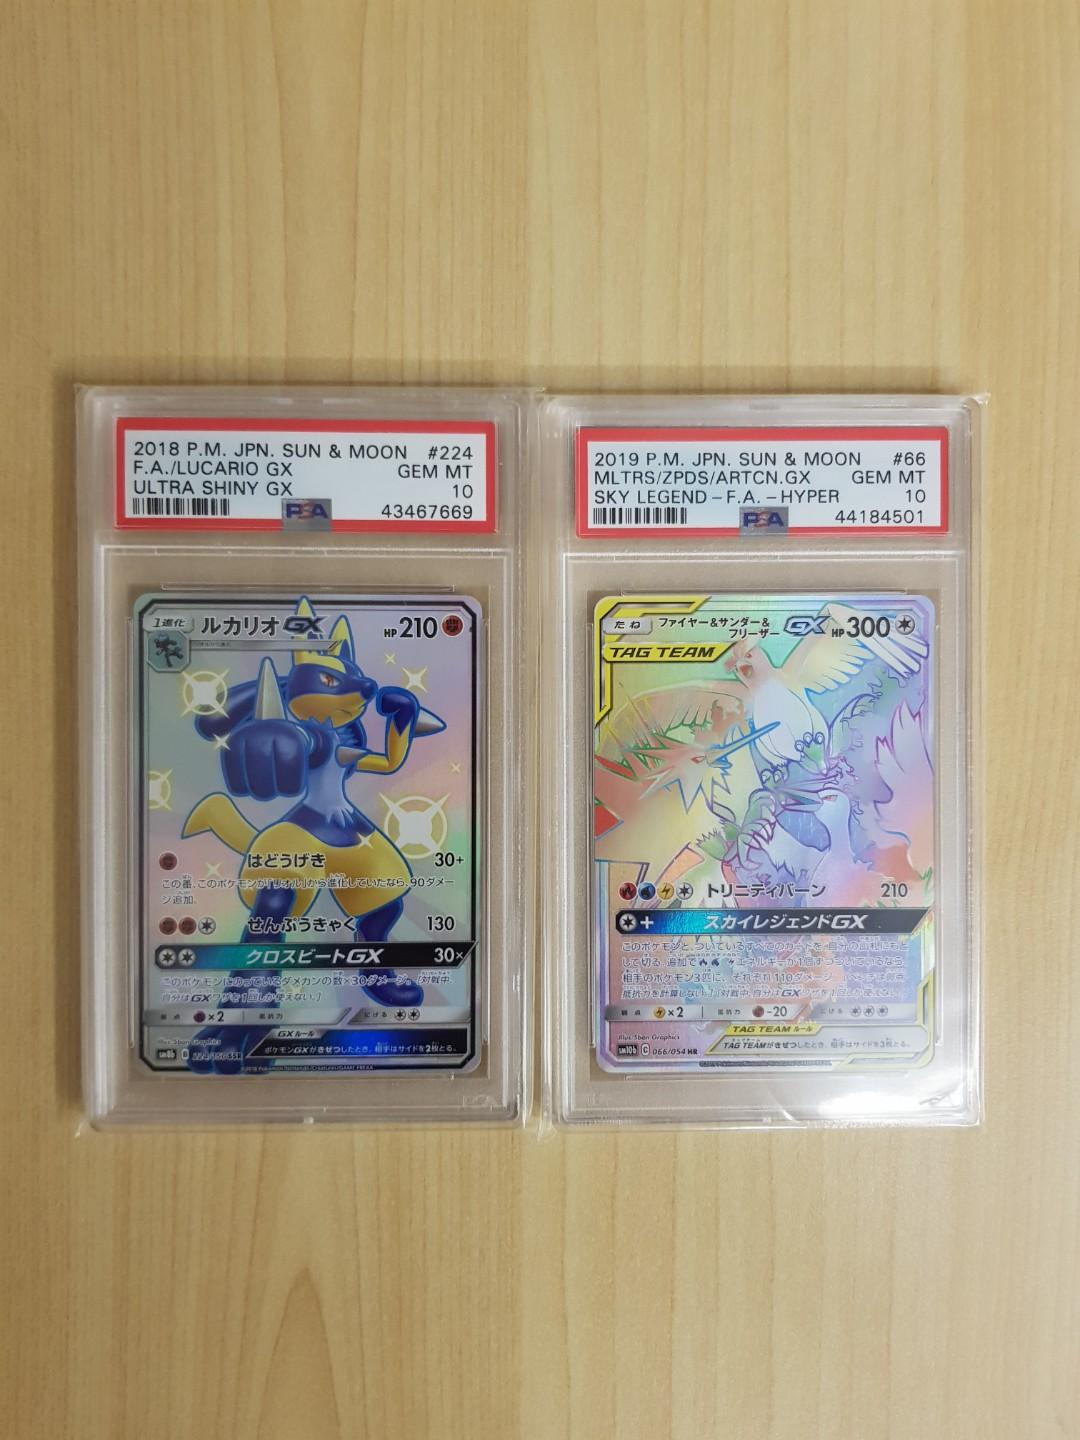 Gem Mint Psa 10 Cards For Sale Toys Games Board Games Cards On Carousell